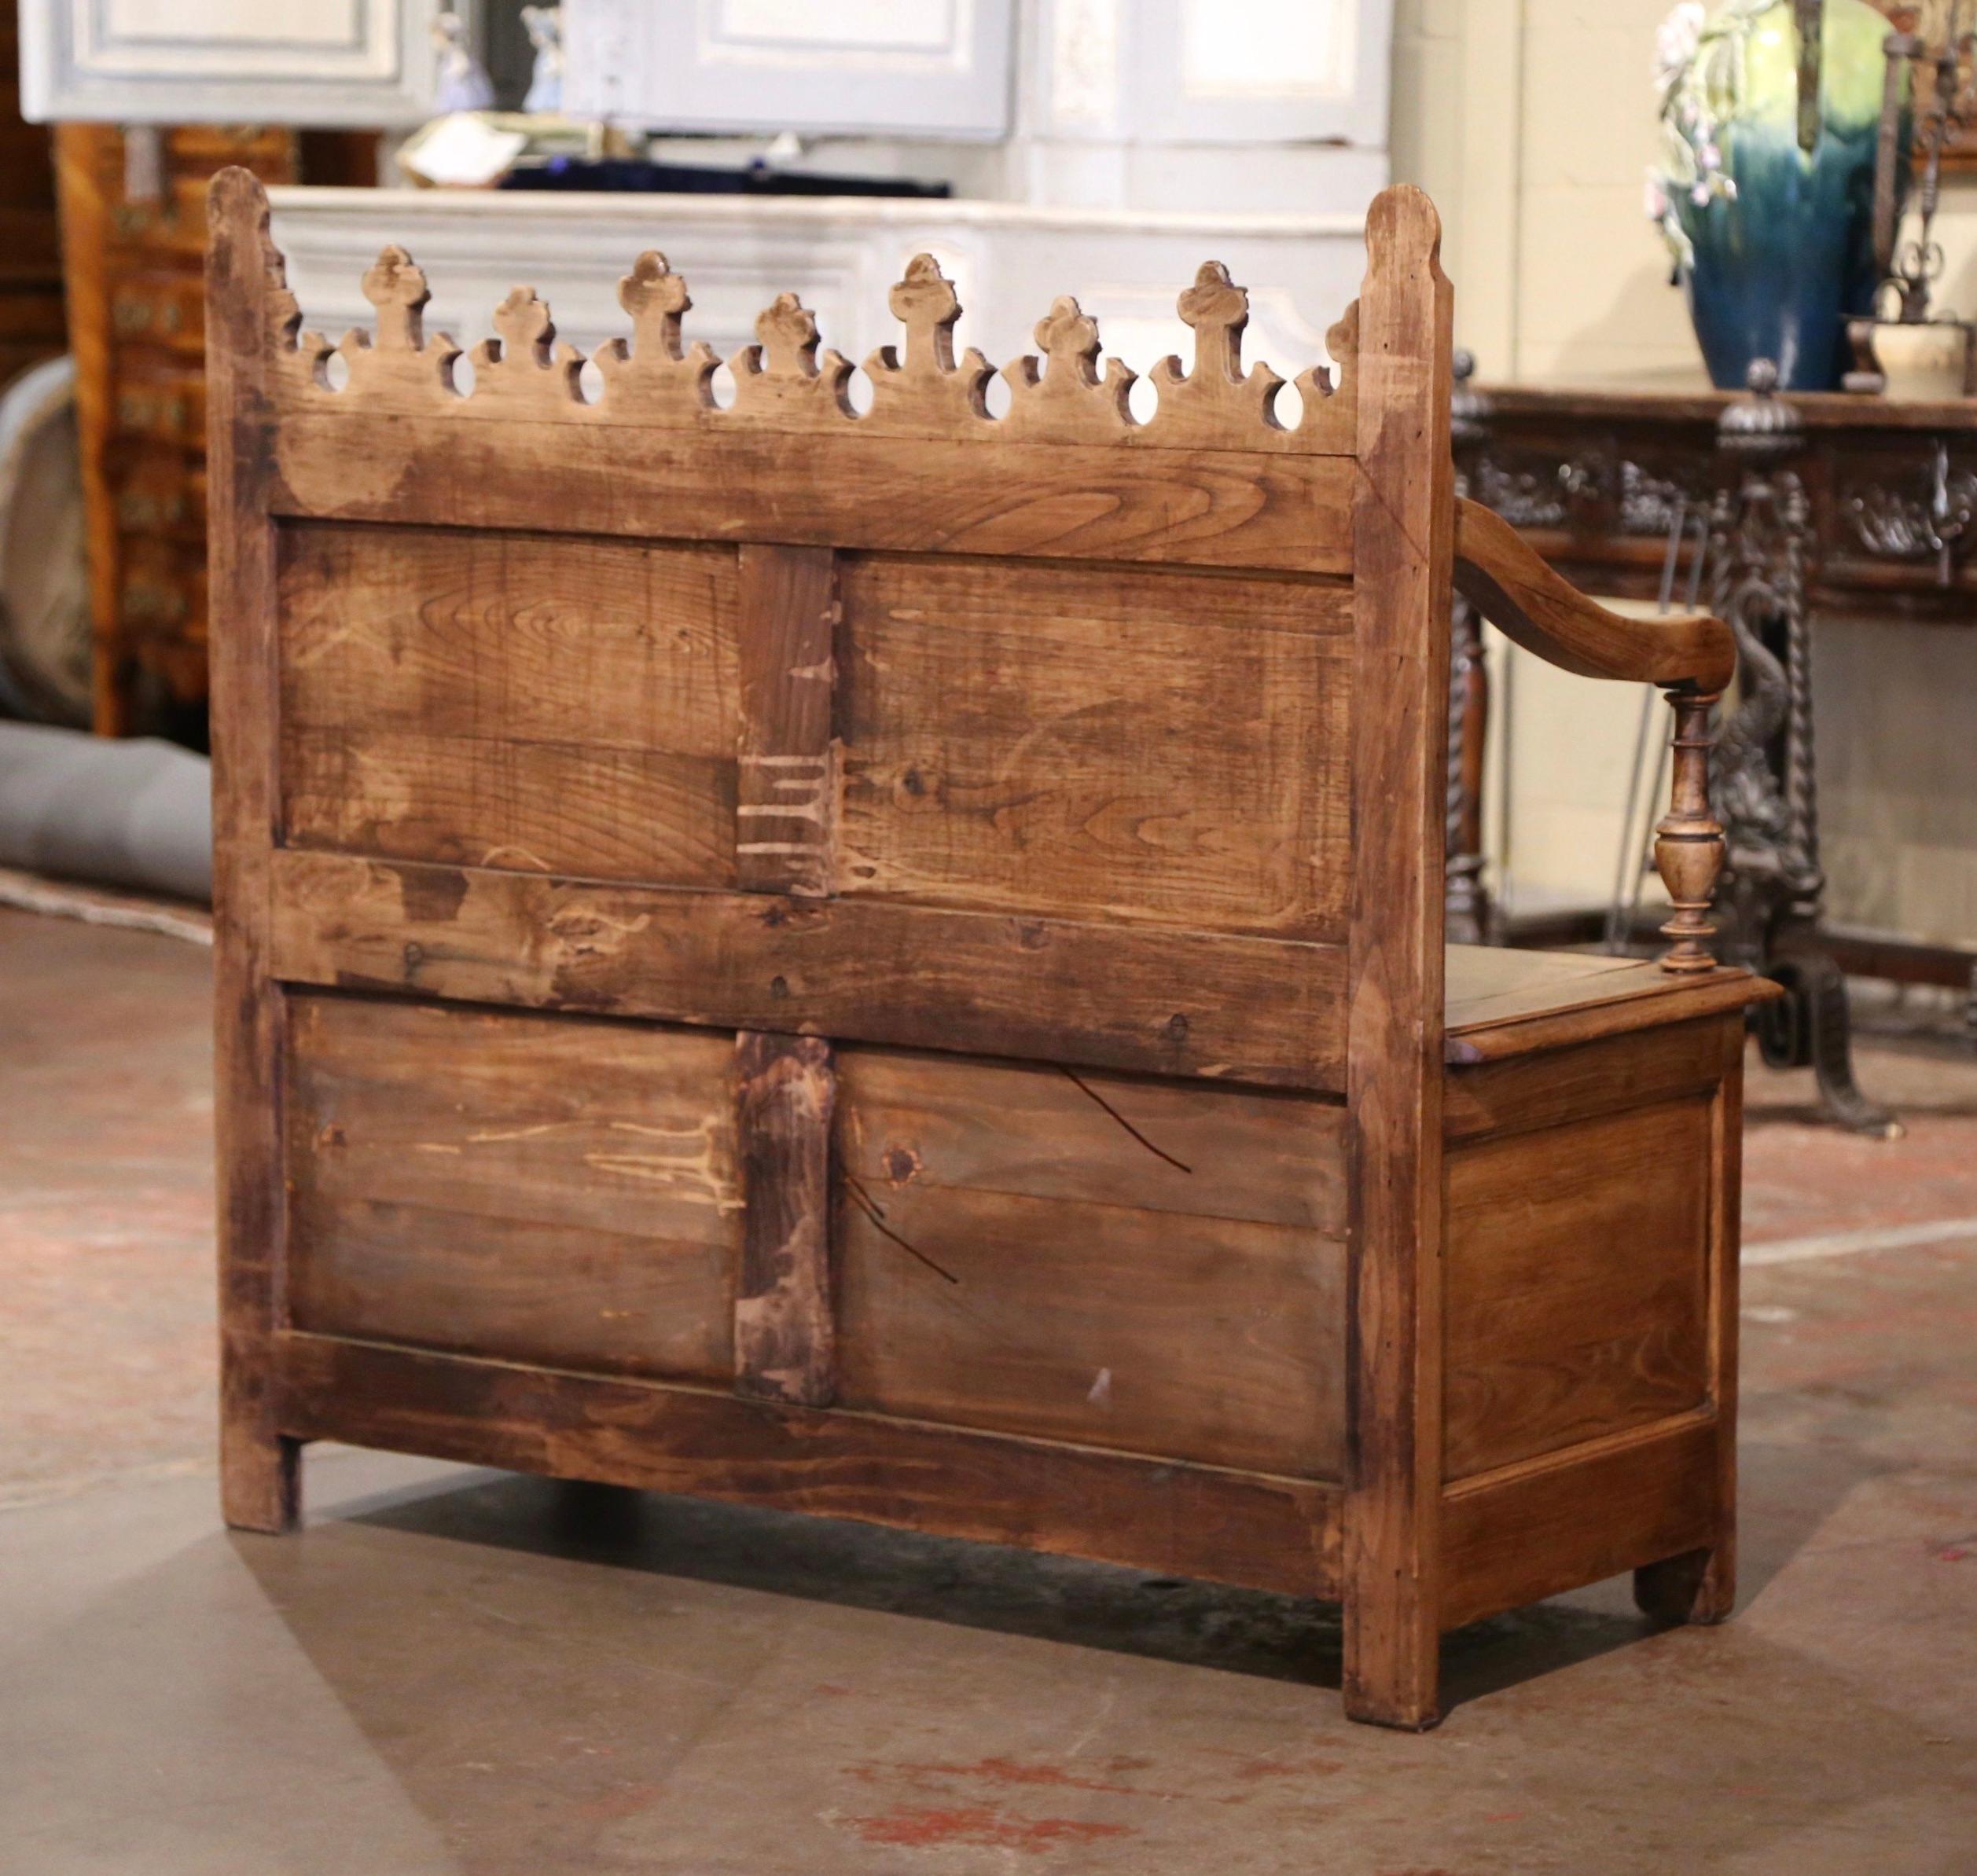 19th Century French Gothic Revival Carved Bleached Oak Hall Bench with Trapdoor For Sale 8